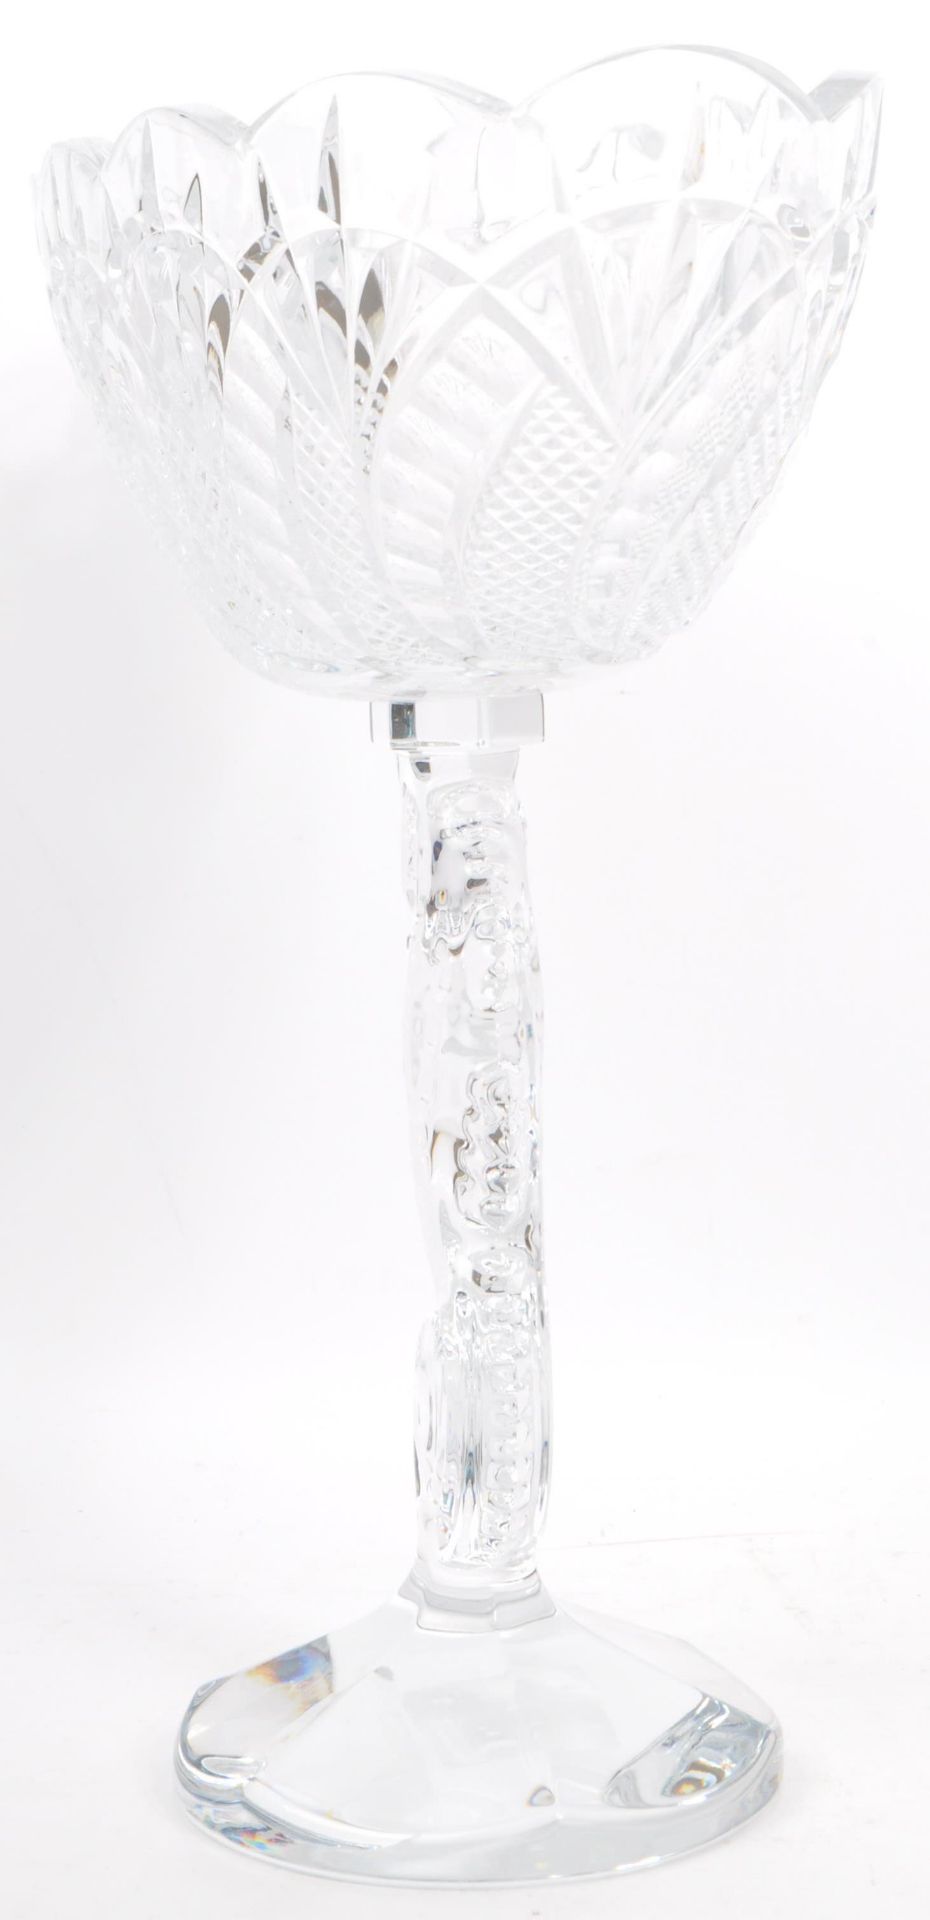 WATERFORD CRYSTAL GLASS - SEAHORSE TAZZA CENTREPIECE NOS - Image 3 of 7